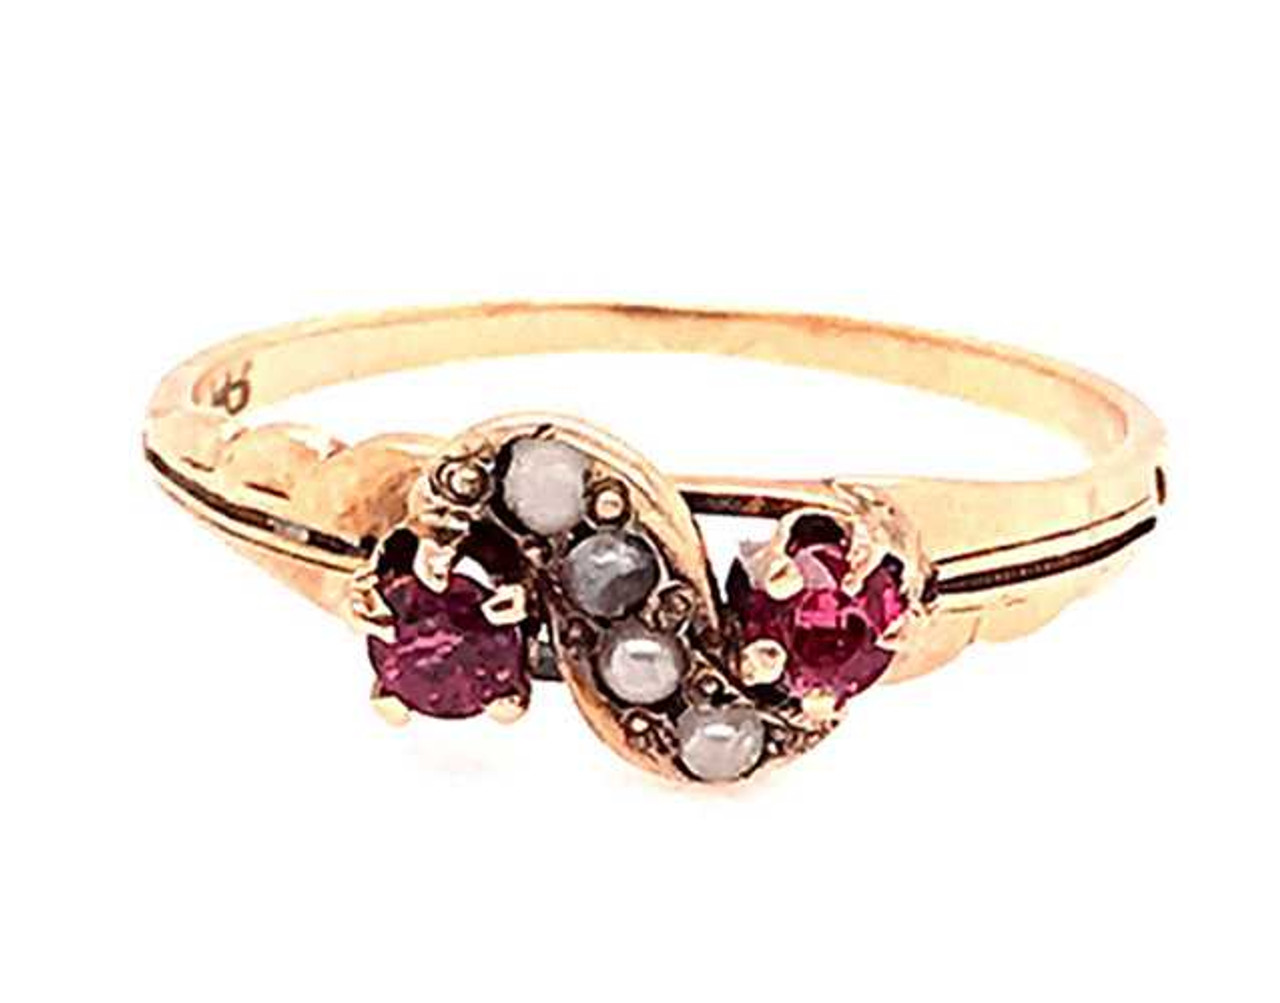 Vintage 1940s 18ct Gold Wide Diamond Cocktail Ring - Ruby Lane